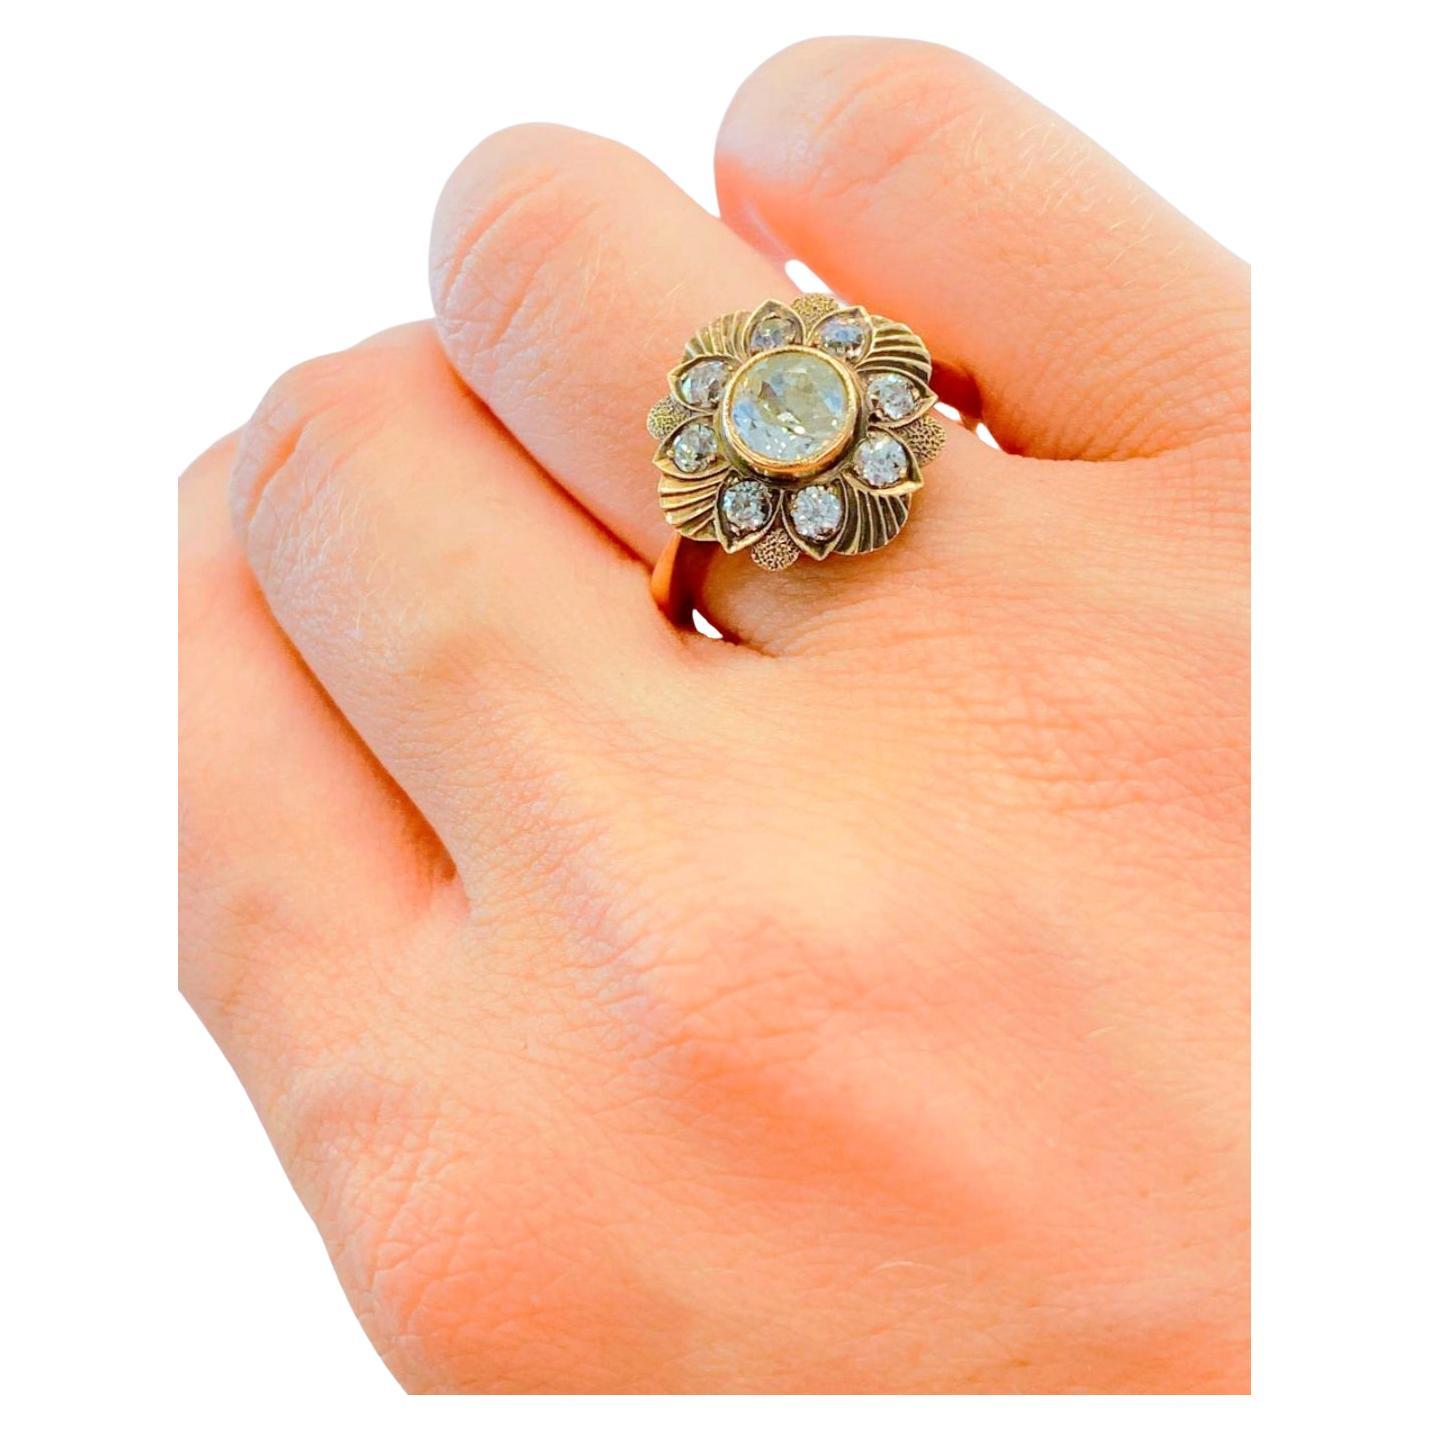 Antique Russian solitaire ring in floral prongs design centered with 1 old mine cut diamond estimate weight of 1.25 carats and 7mm diameter I color vs clearity and ring head diameter 14mm hall marked 56 imperial Russian gold standard and cocause